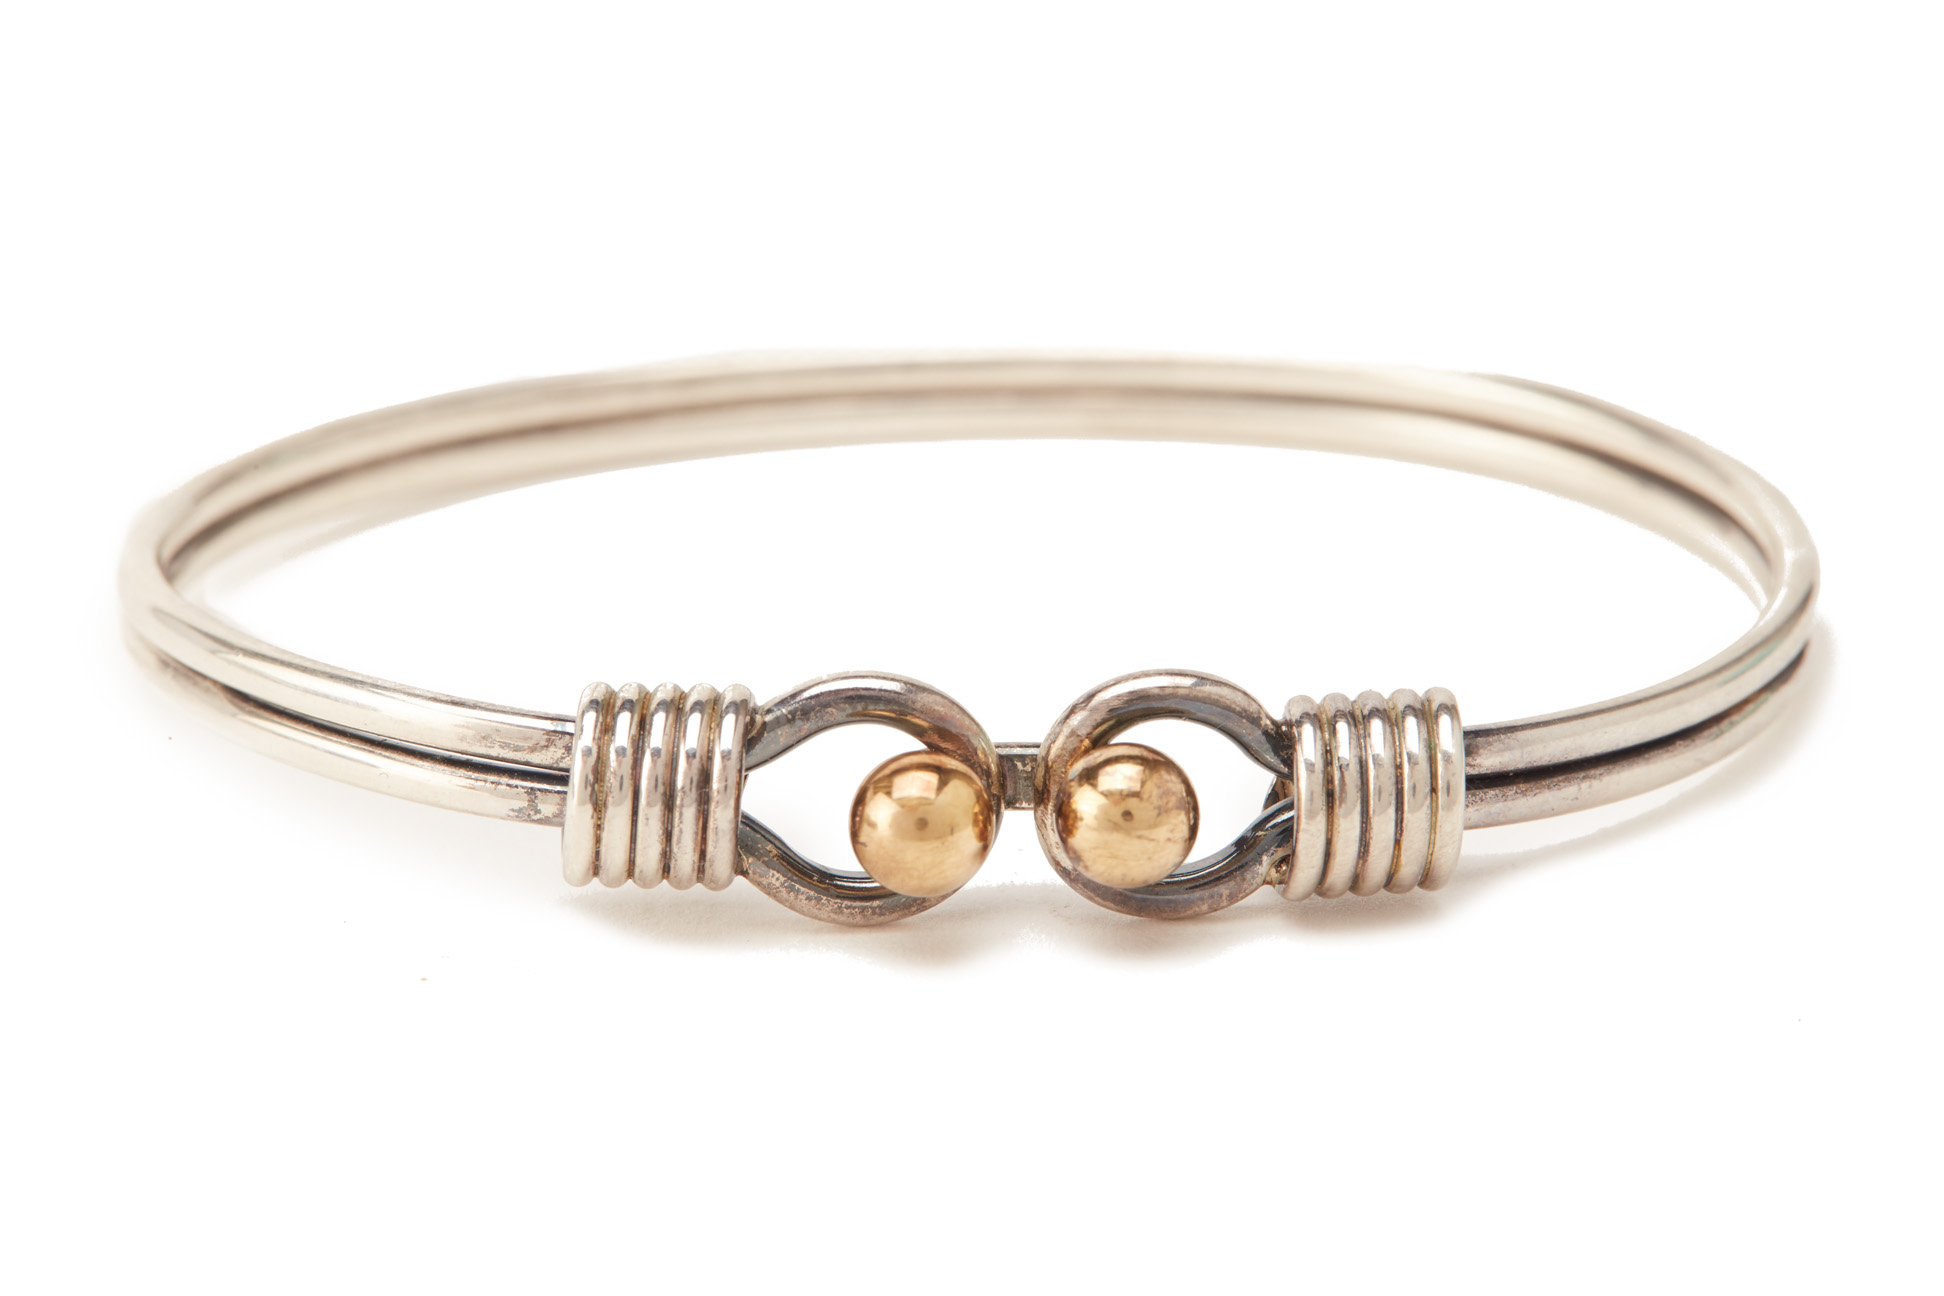 A TIFFANY & CO SILVER AND GOLD BANGLE